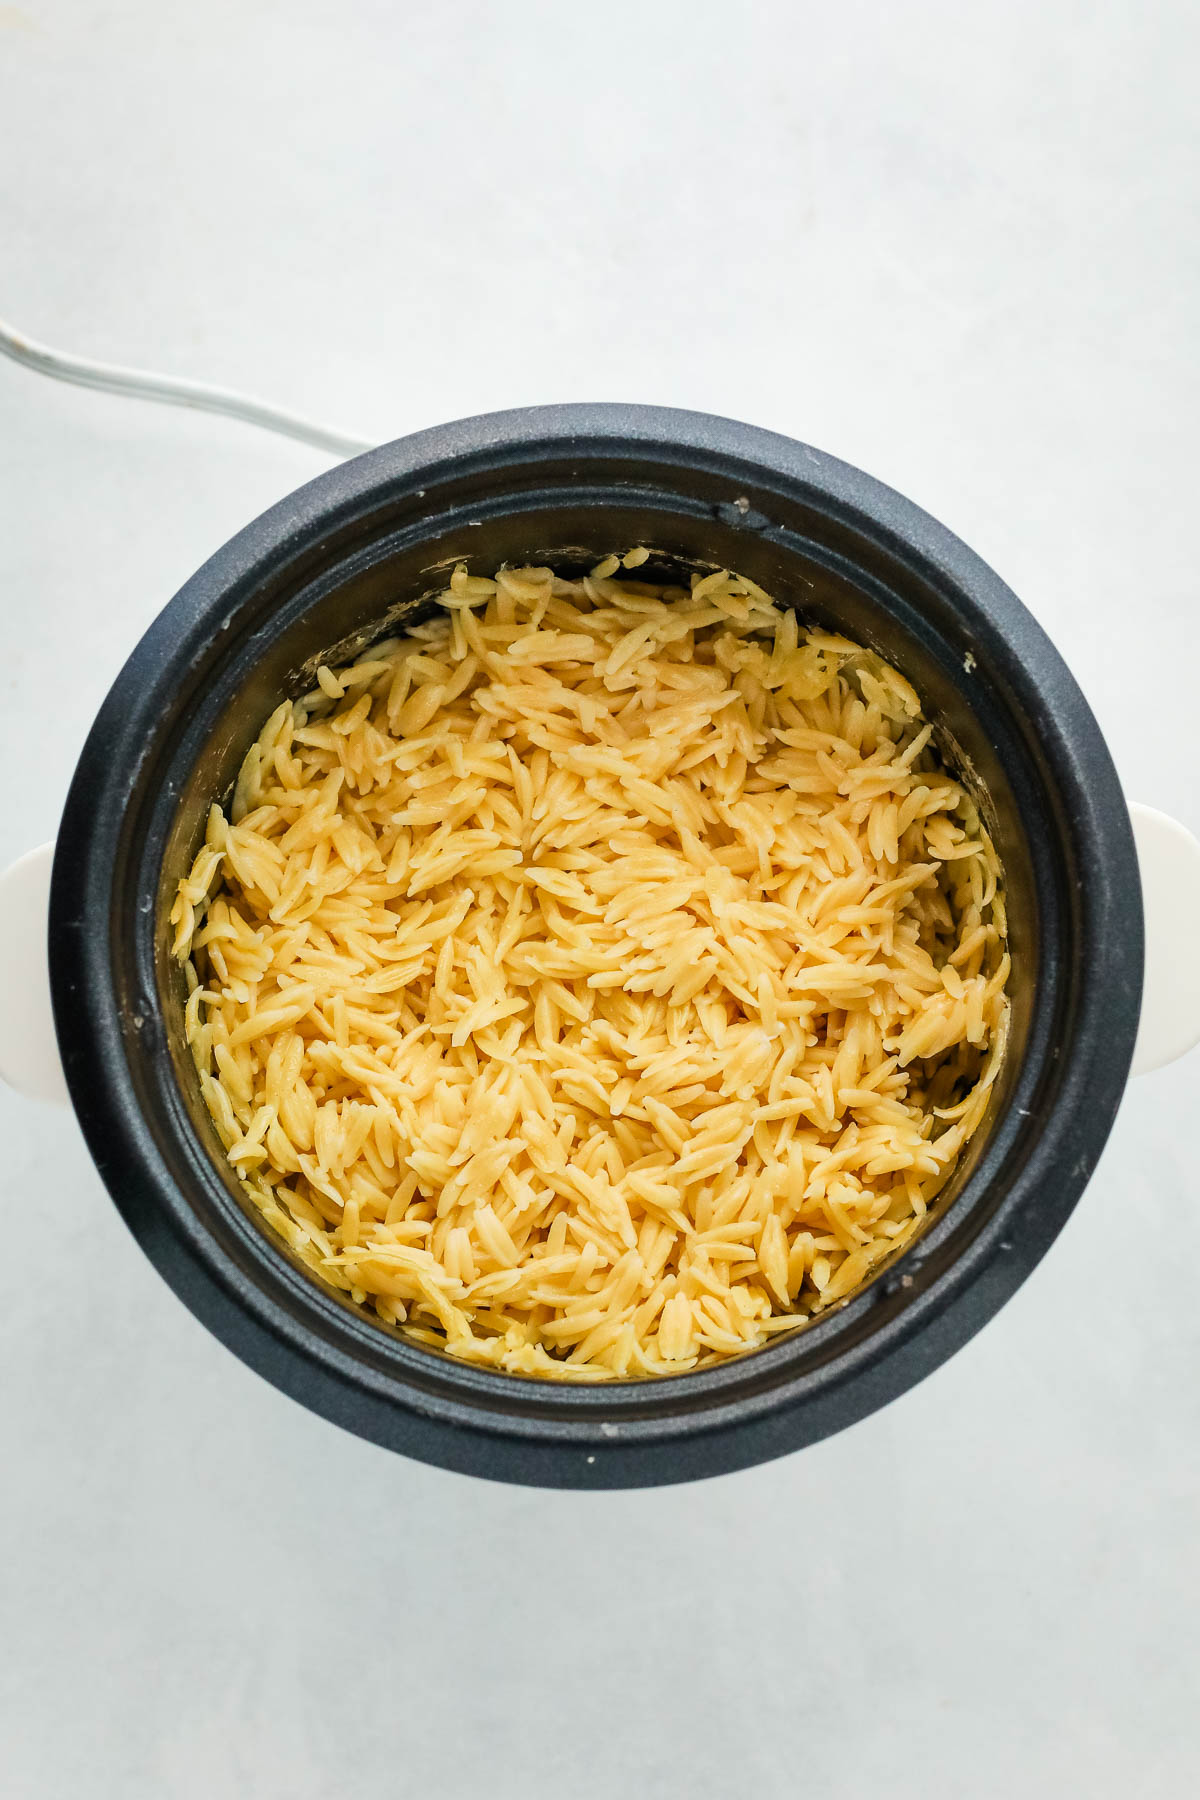 orzo pasta in a rice cooker